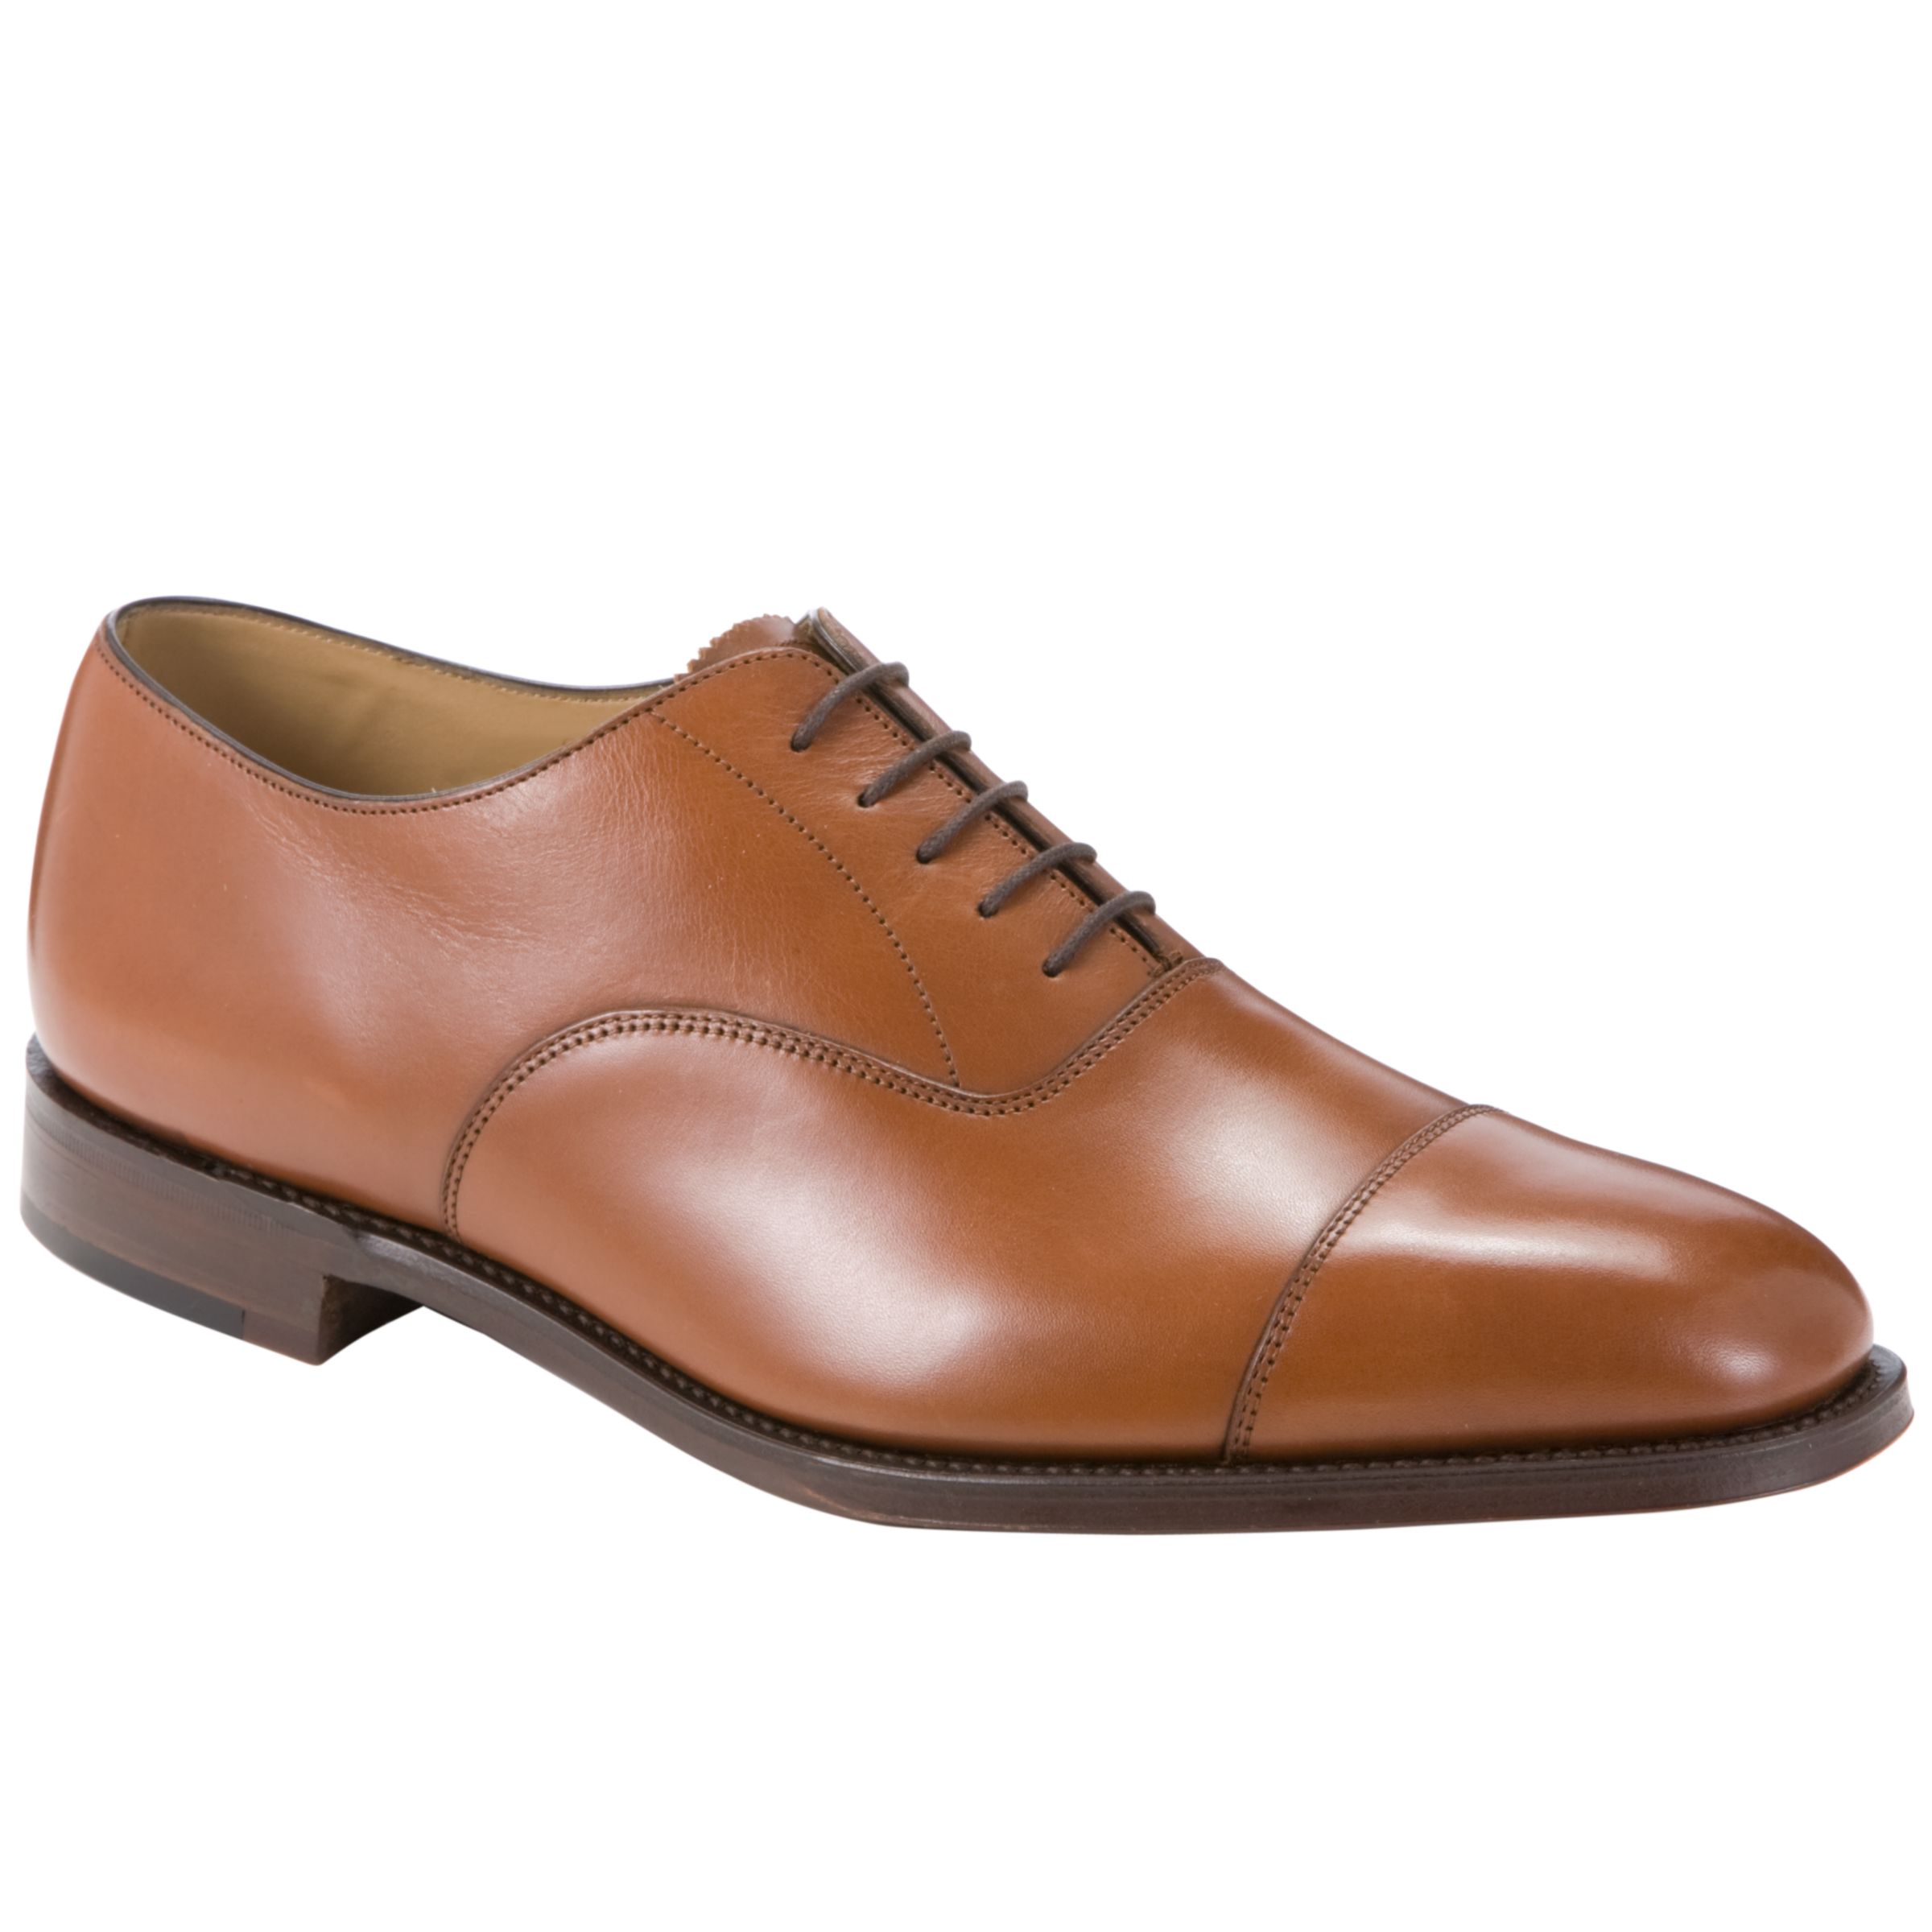 Loake Aldwych Leather Oxford Shoes, Chestnut at John Lewis